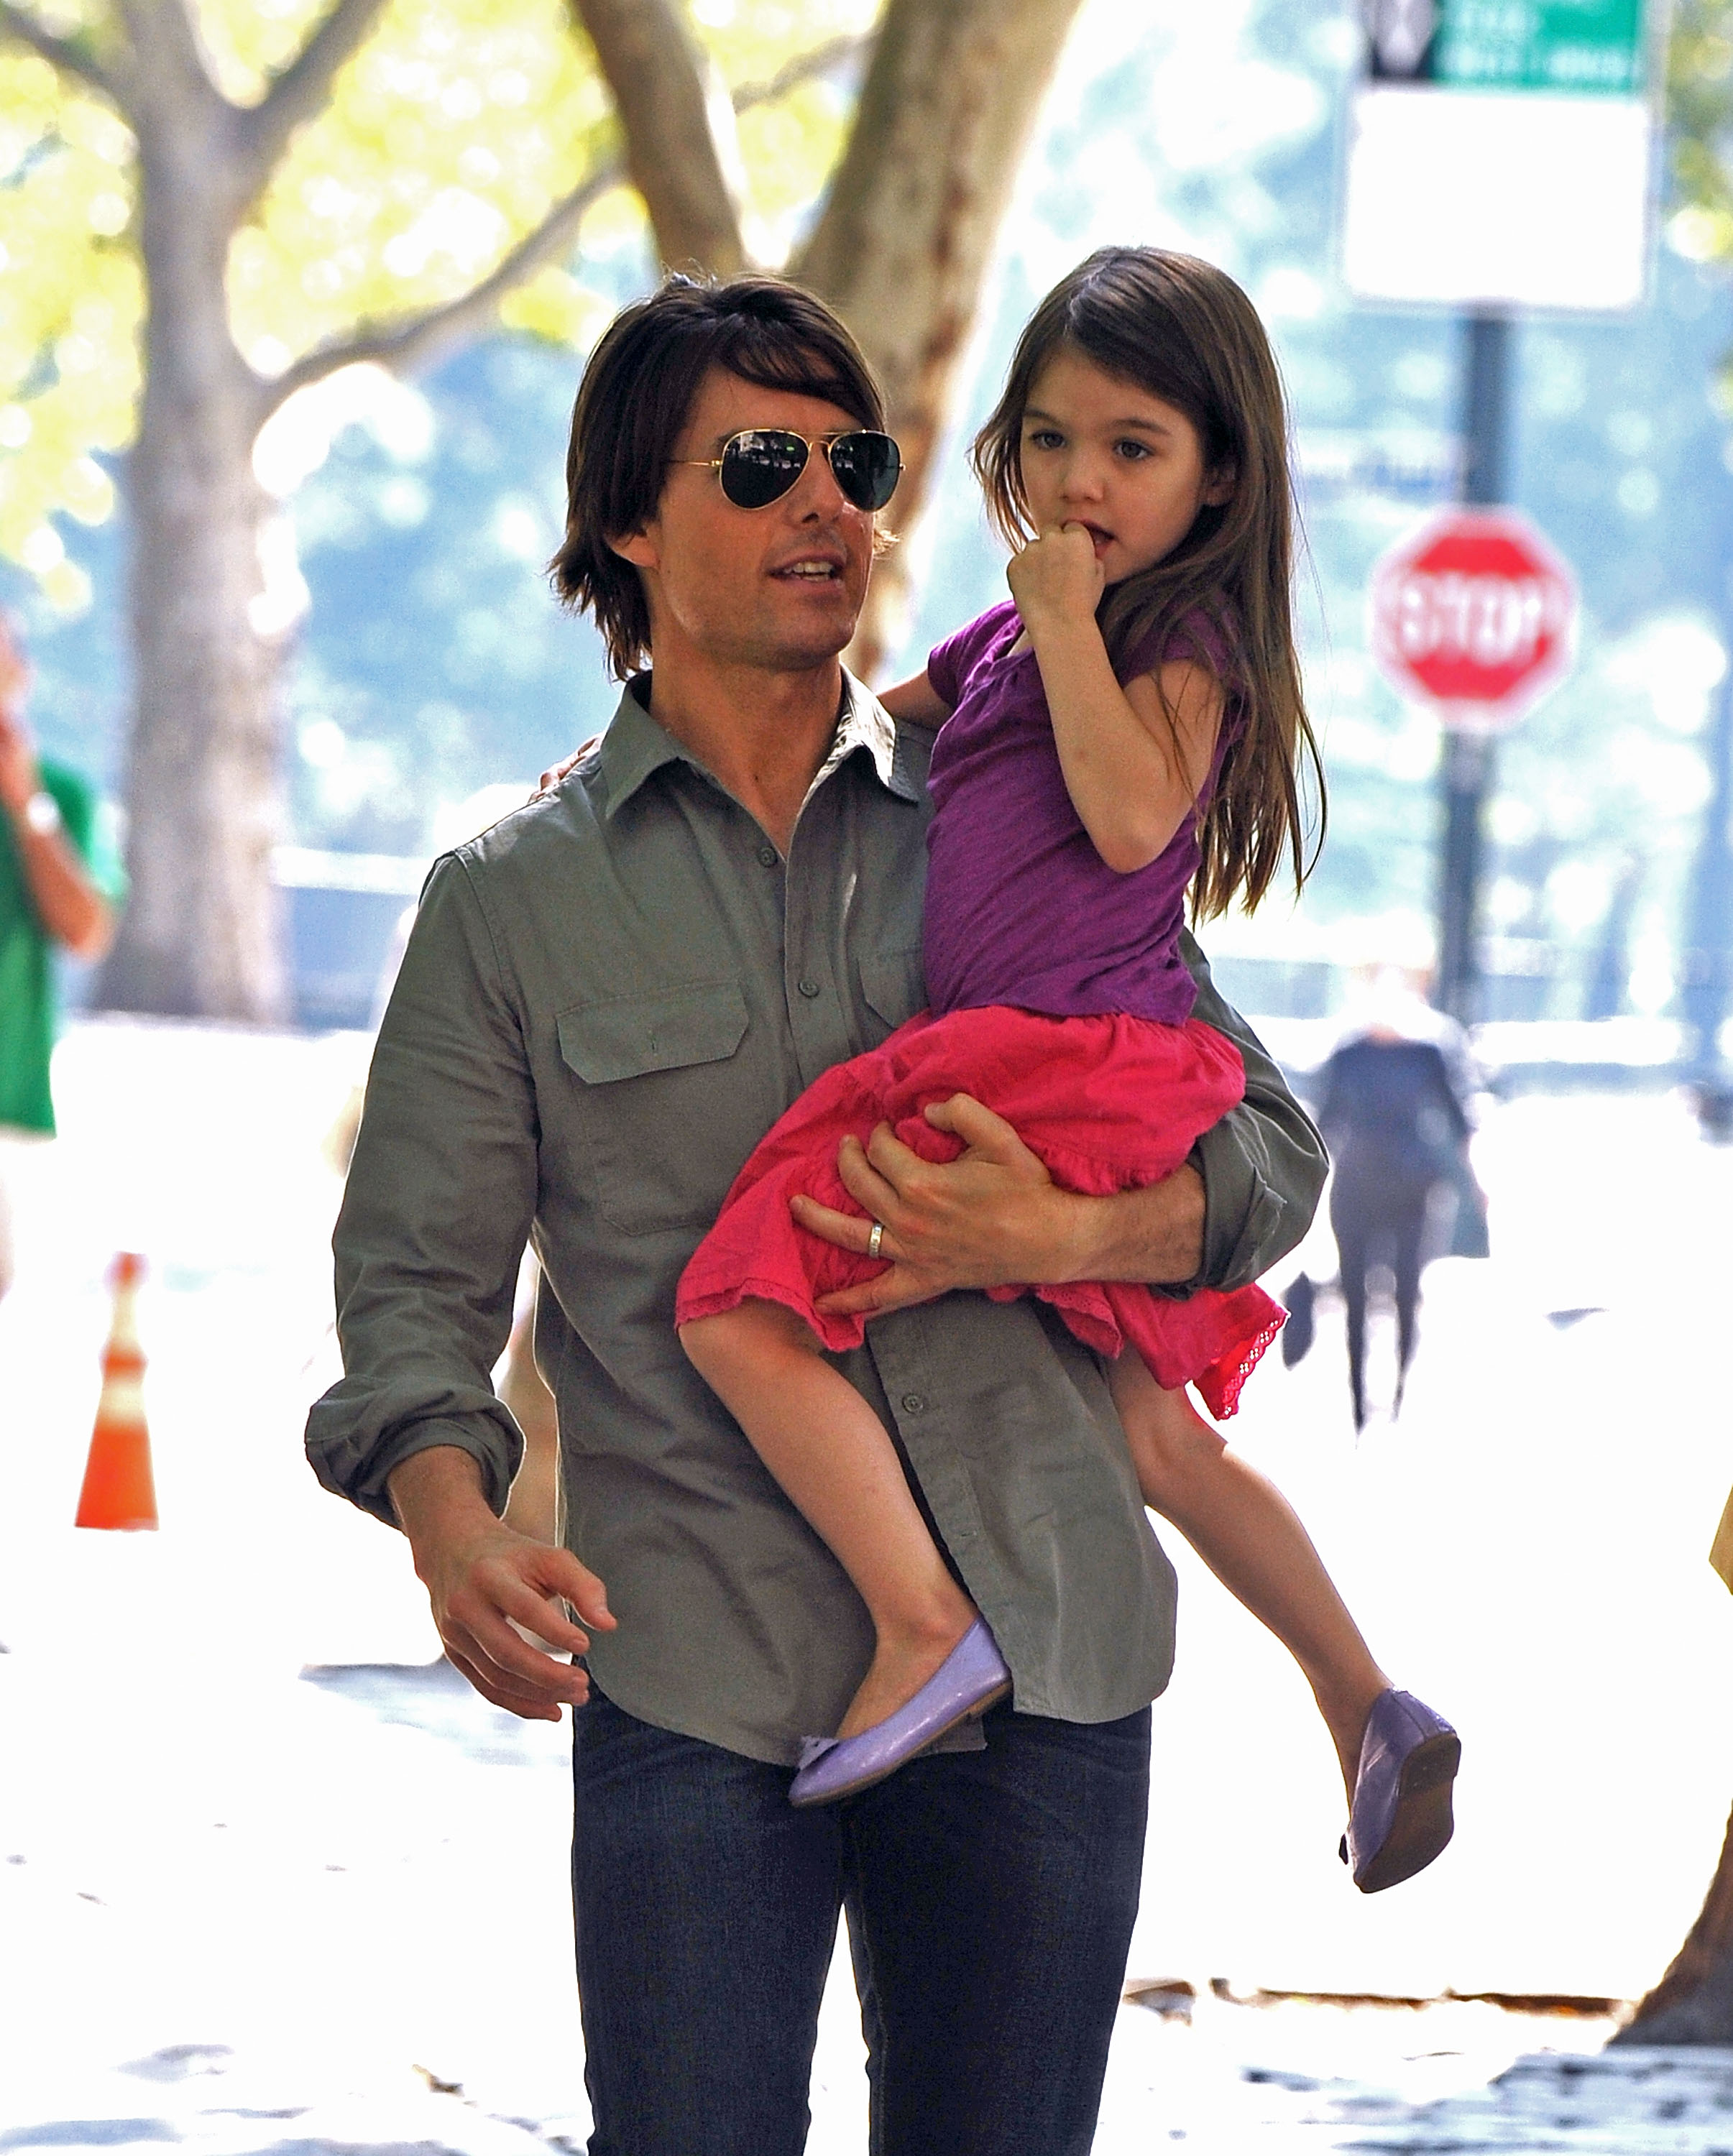 Tom Cruise and Suri Cruise visit a Central Park West playground in New York City, on September 7, 2010. | Source: Getty Images